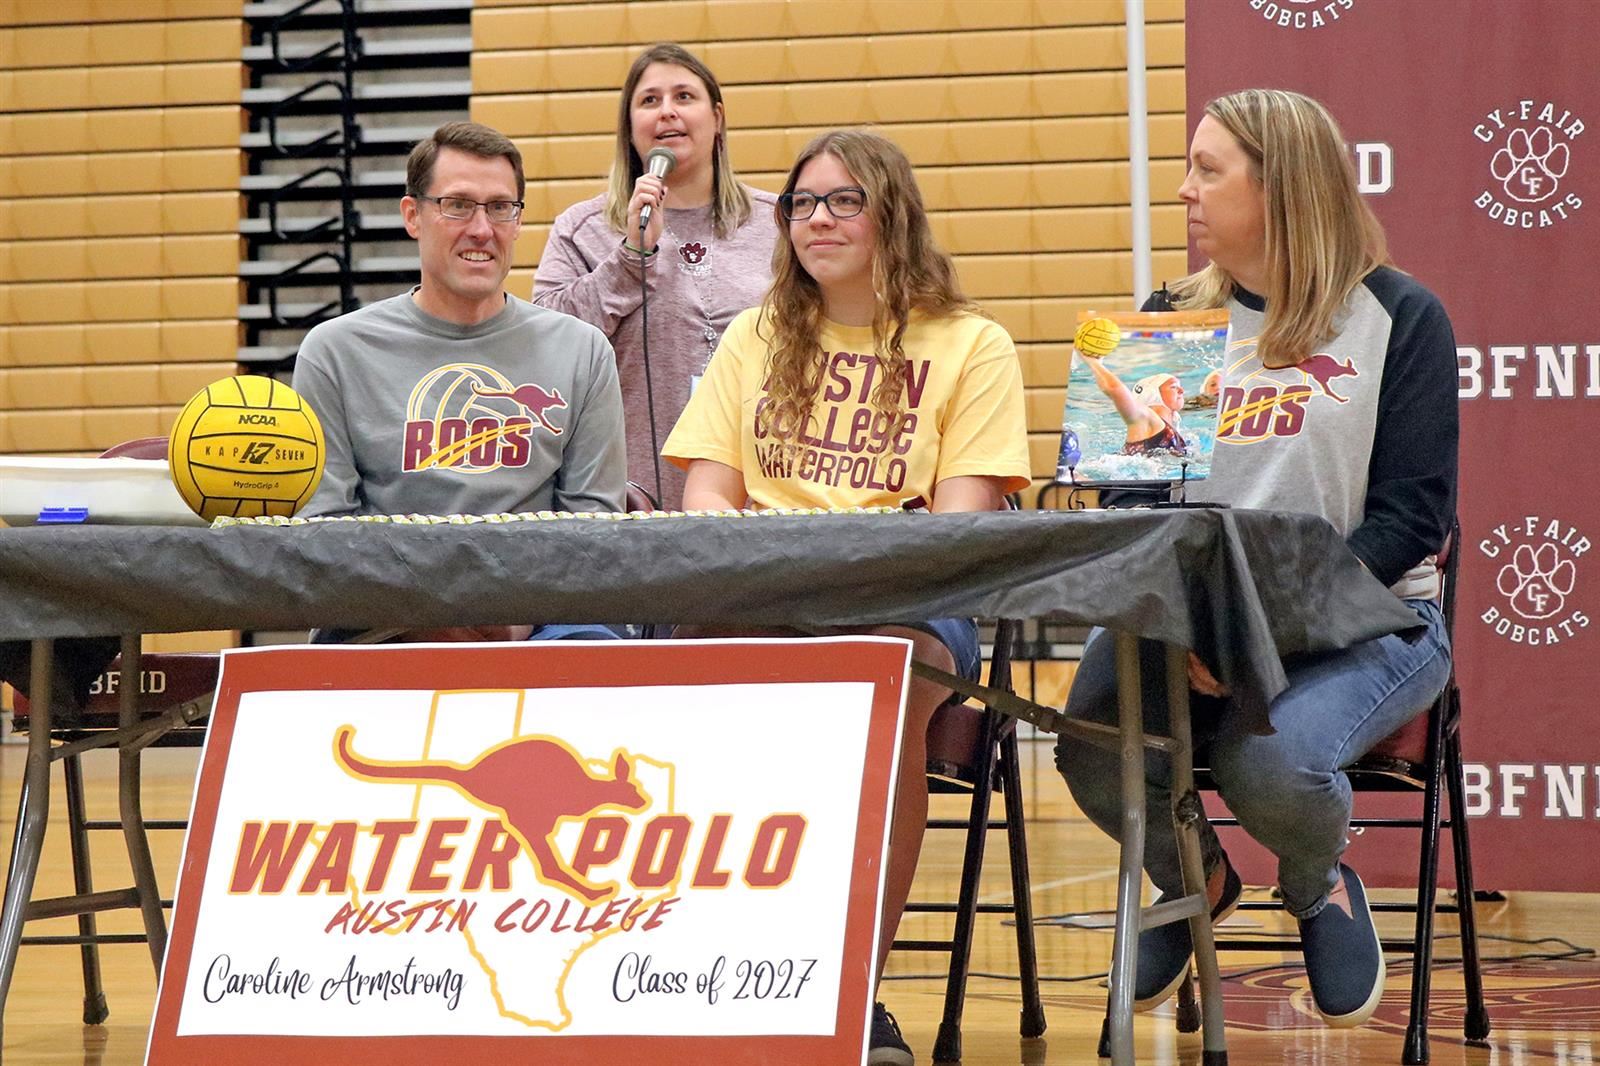 Cy-Fair High School senior Caroline Armstrong, seated center, signed a letter of intent to Austin College.